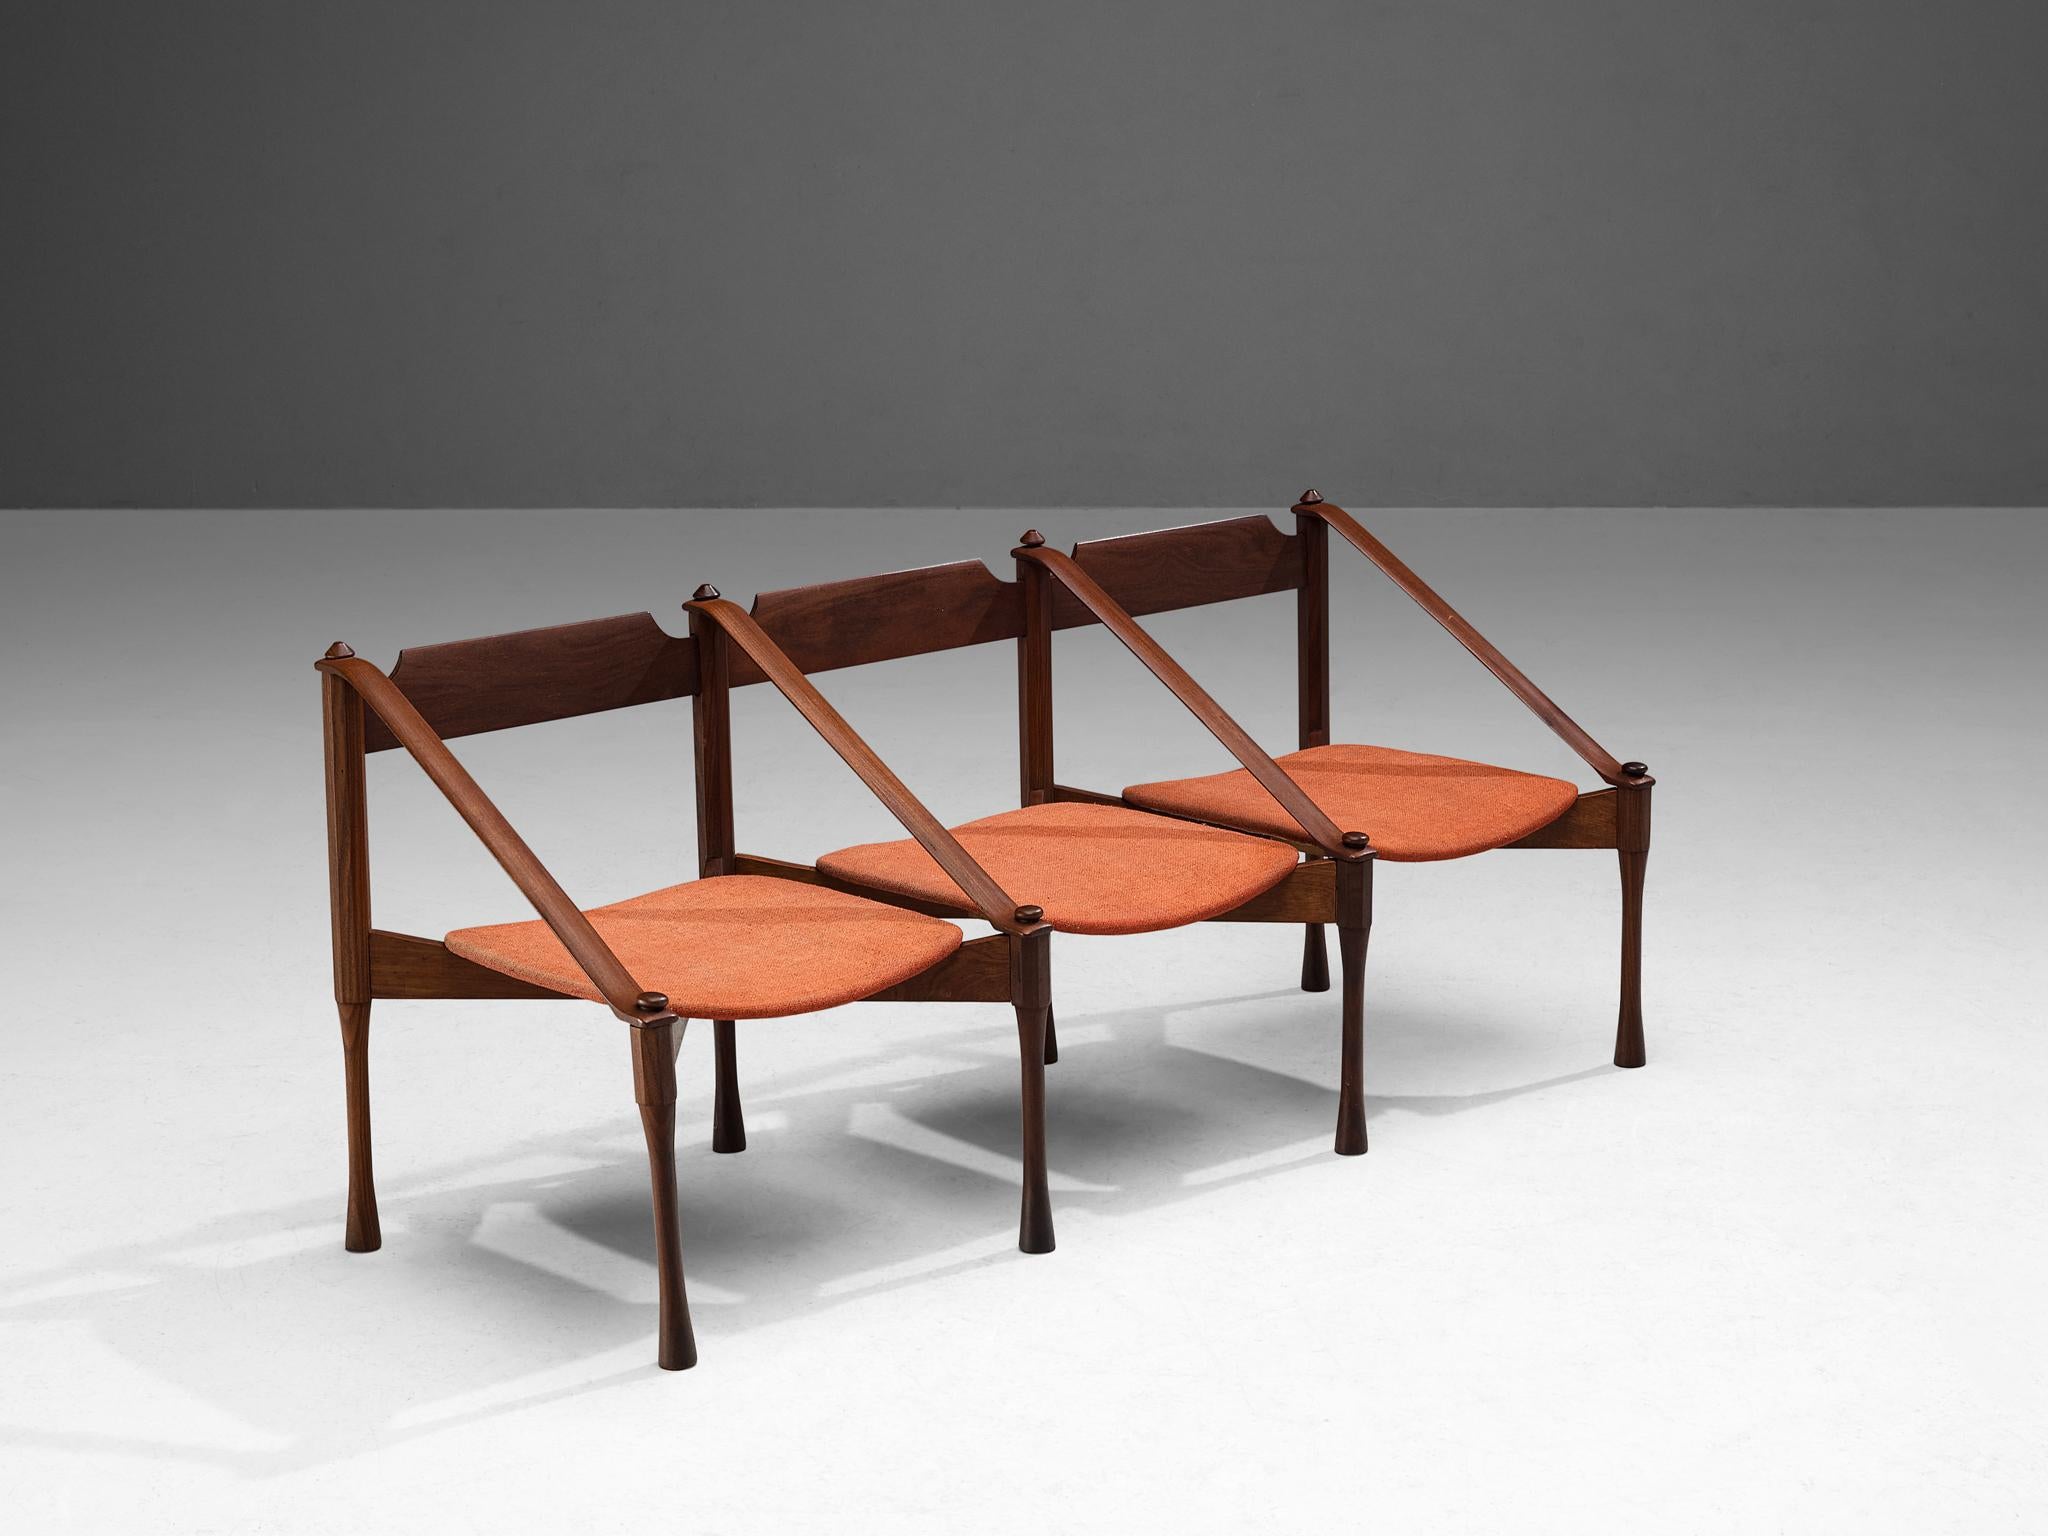 Giulio Moscatelli, bench, teak, fabric, Italy, ca. 1950.

This bench by Giulio Moscatelli is distinctive in its execution. The legs are beautifully sculpted, showing concave carvings. The diagonal placed armrests give a sense of dynamism. A quite